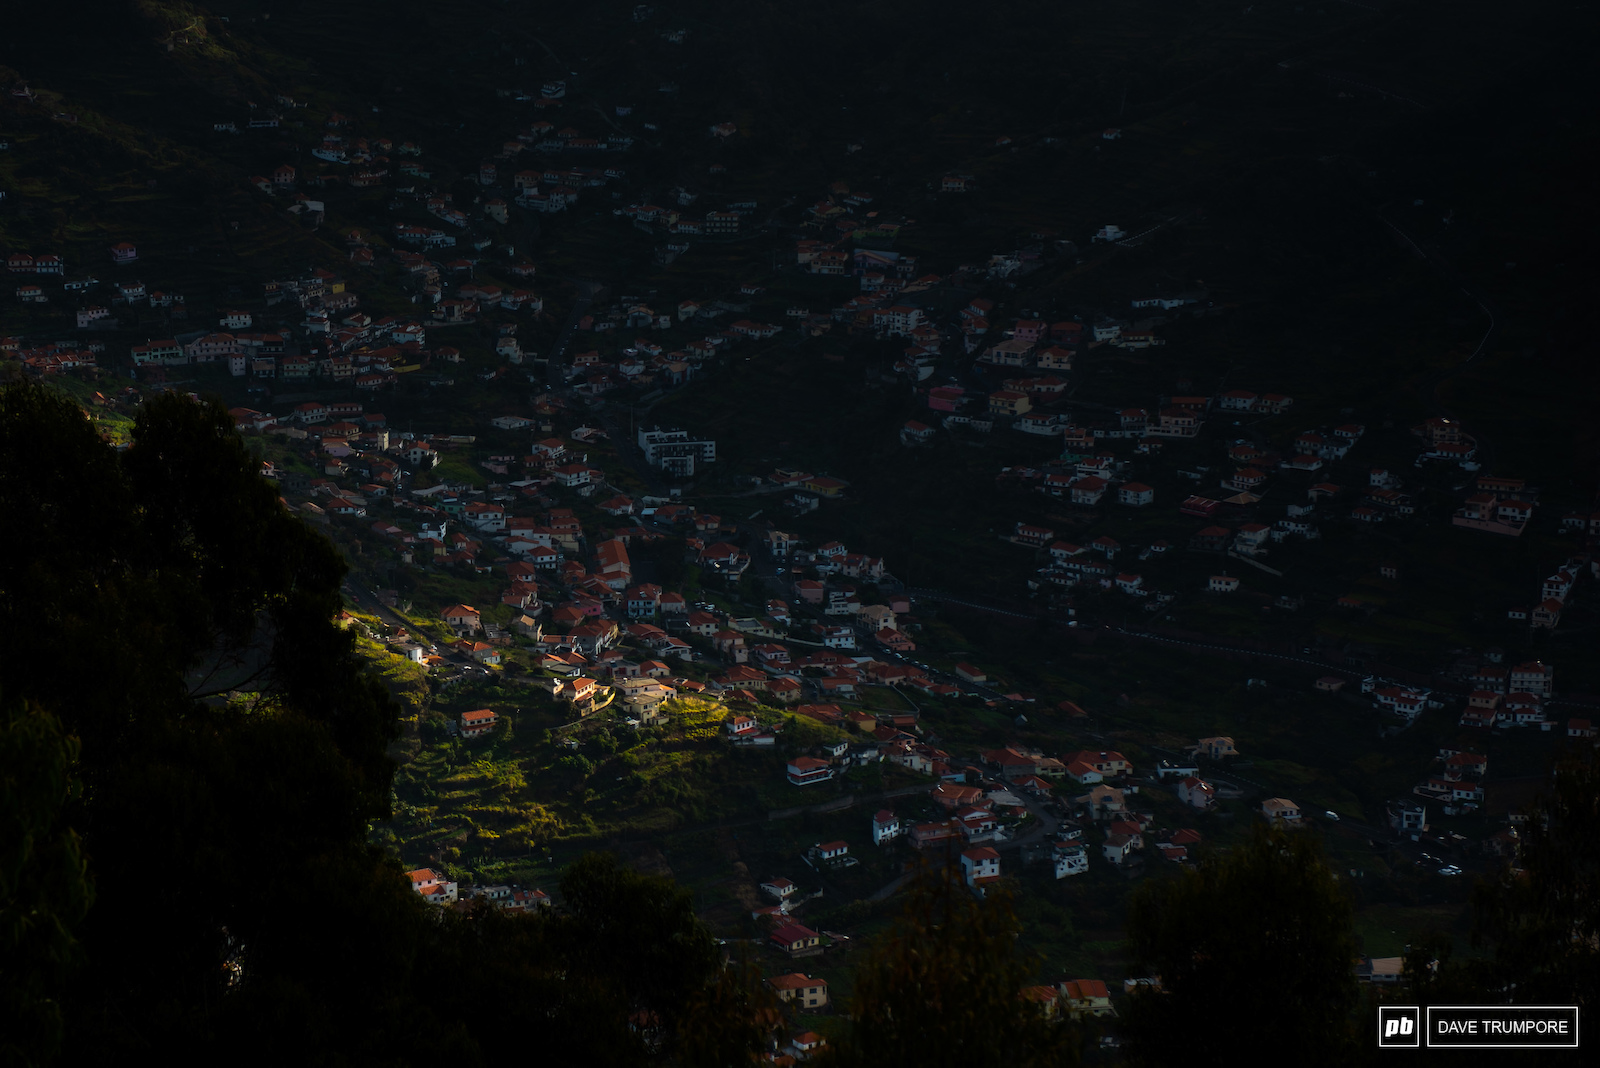 First light of the morning in Machico